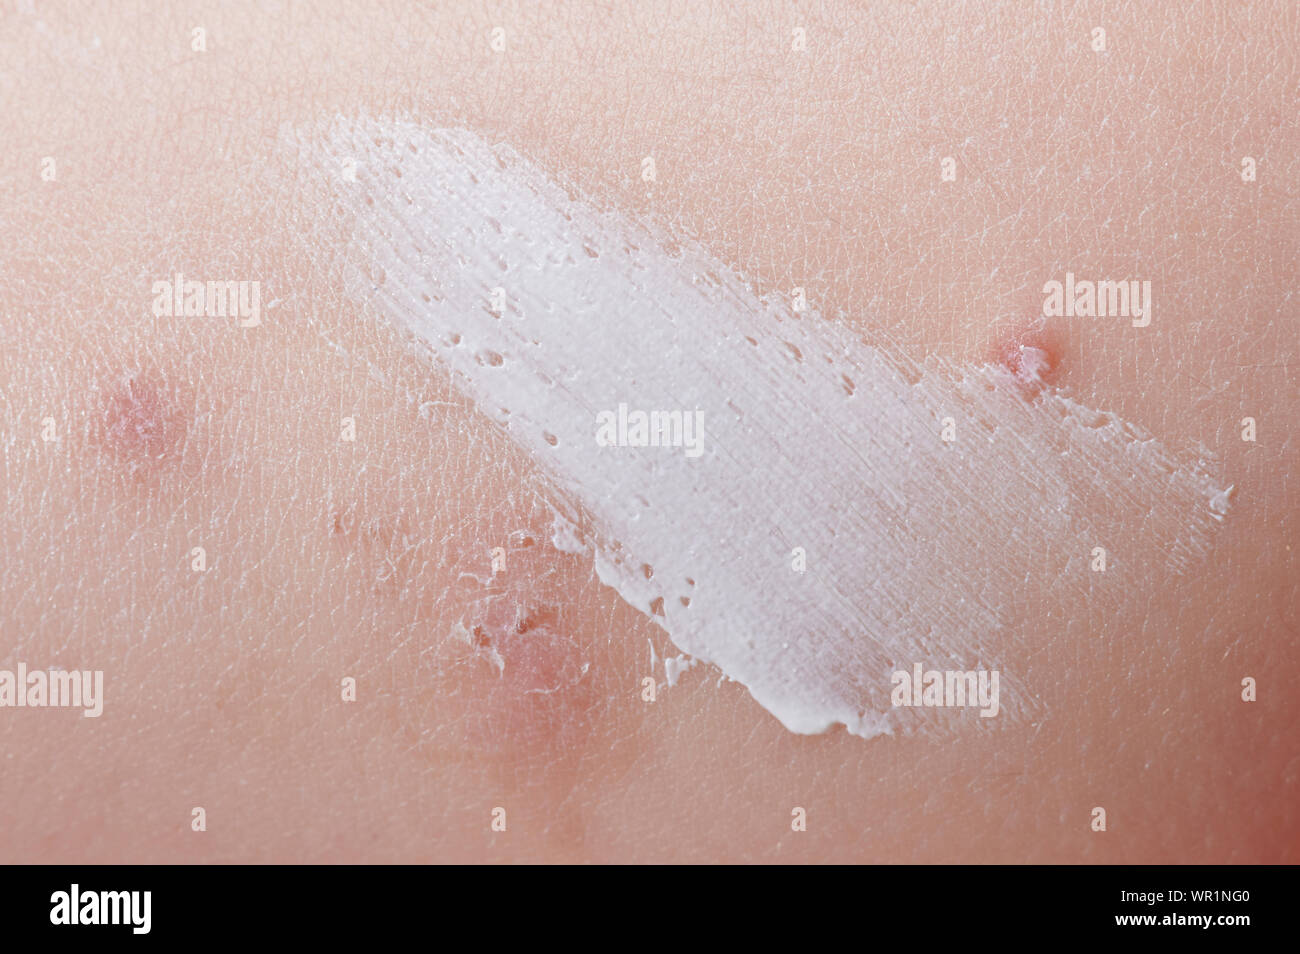 Applying cream on skin scar close up view. Treatment of skin problem Stock Photo